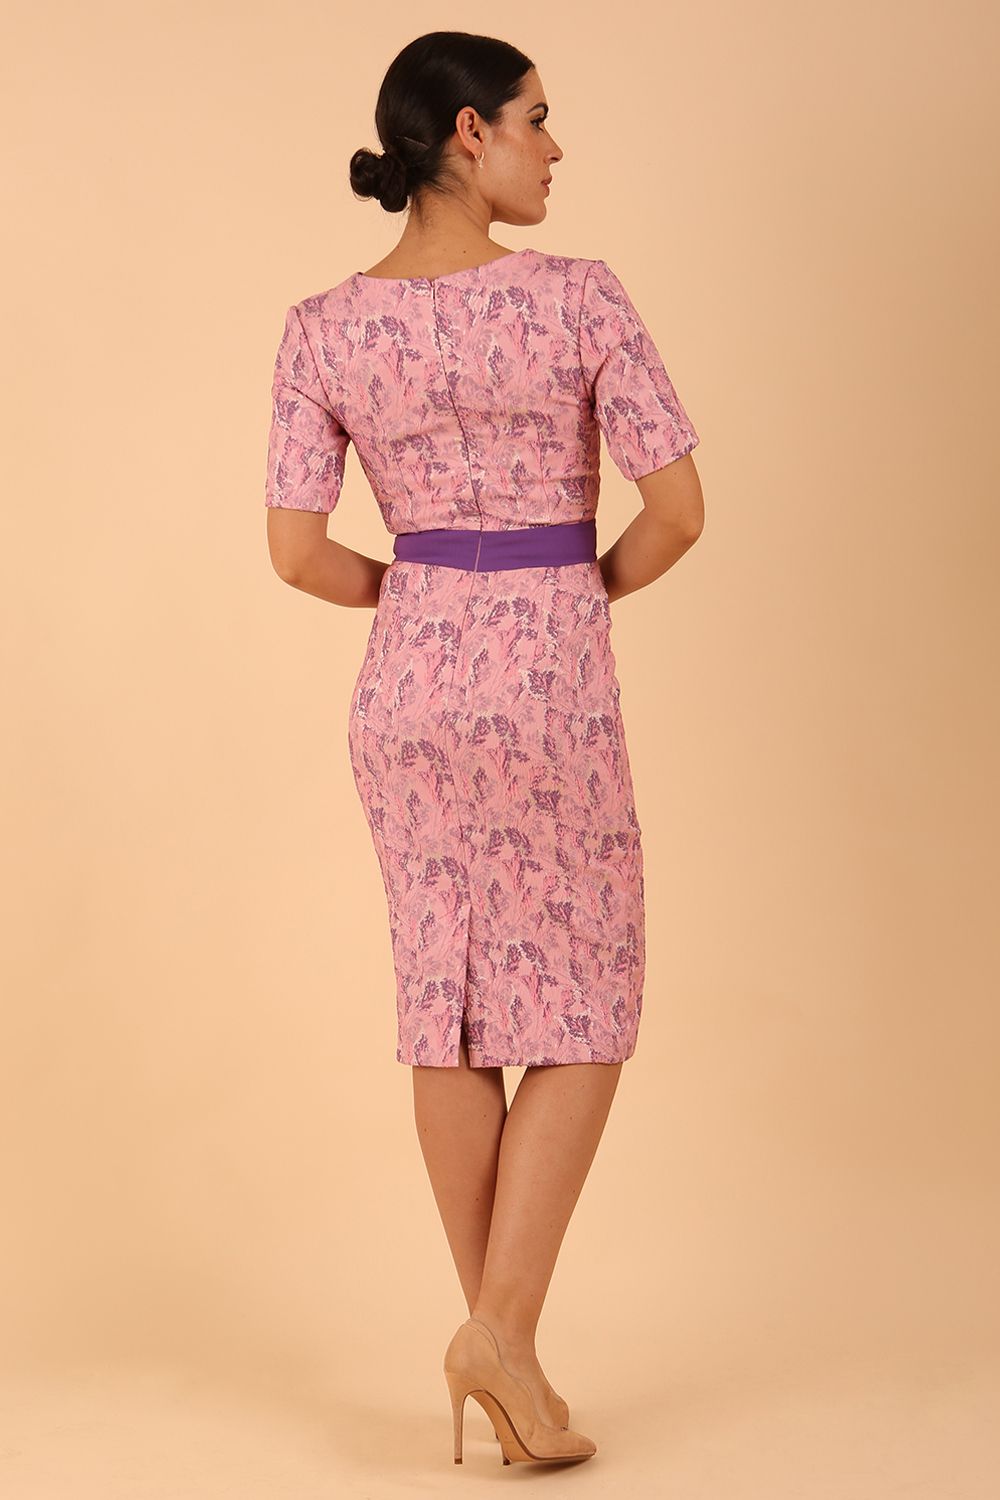 model wearing a diva catwalk Floella Jacquard Dress shor sleeves pencil dress in jacquard fabric in pink lavender with purple waistband contrast colour back